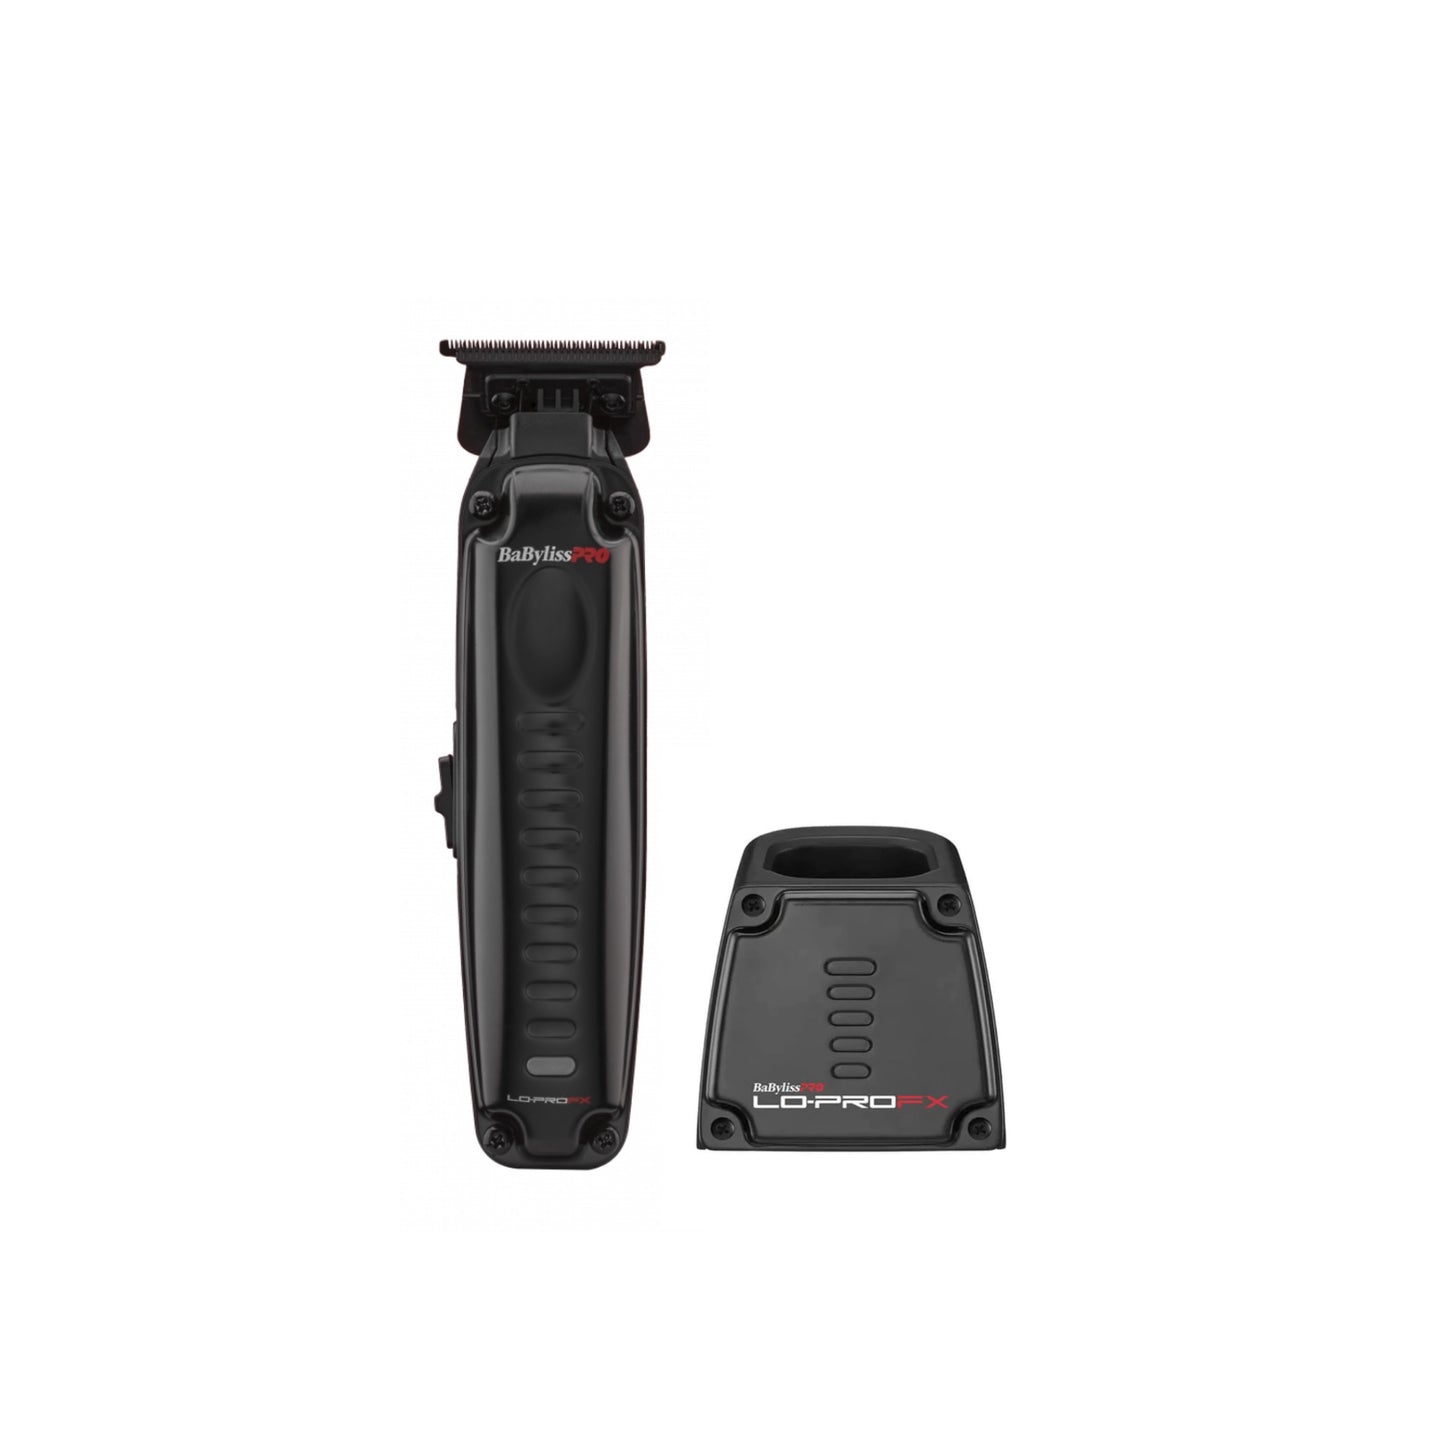 Babyliss Lo-pro Trimmer with charging stand